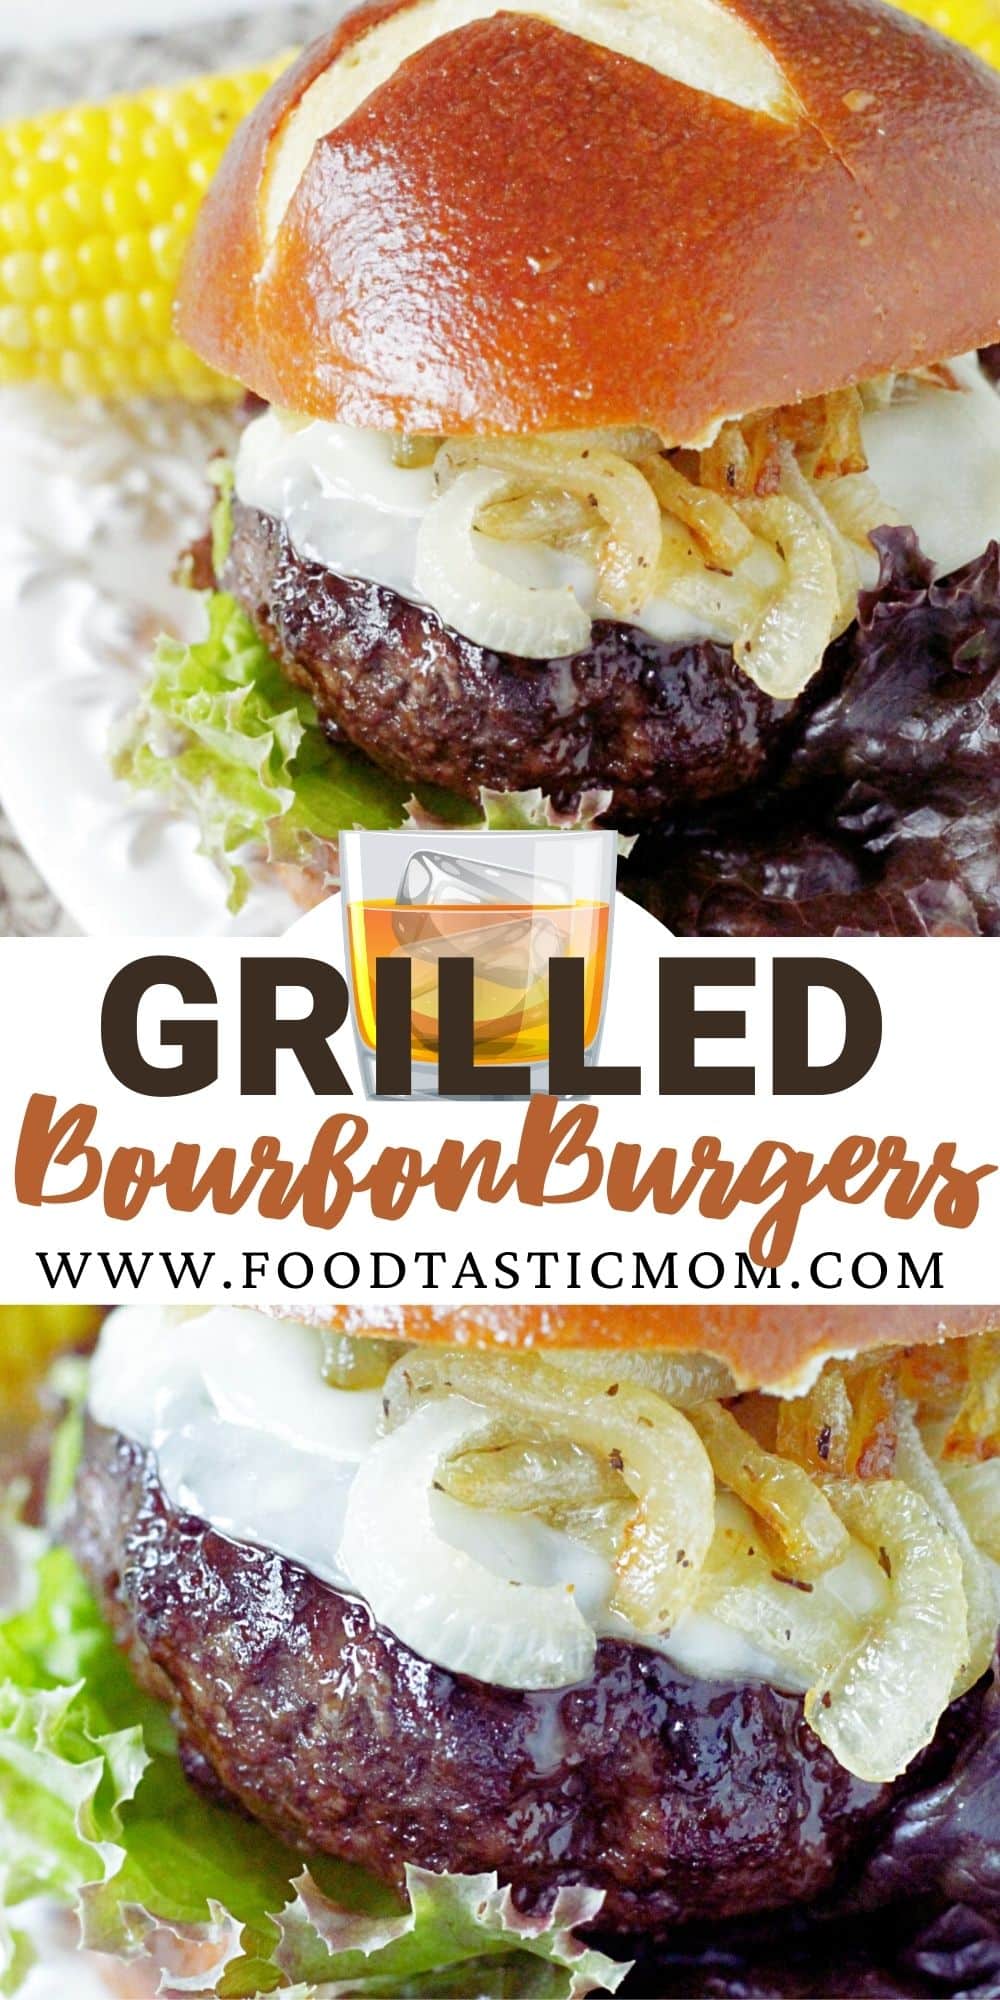 Deliciously seasoned and grilled beef burgers topped with bourbon caramelized onions and melted Provolone cheese. via @foodtasticmom